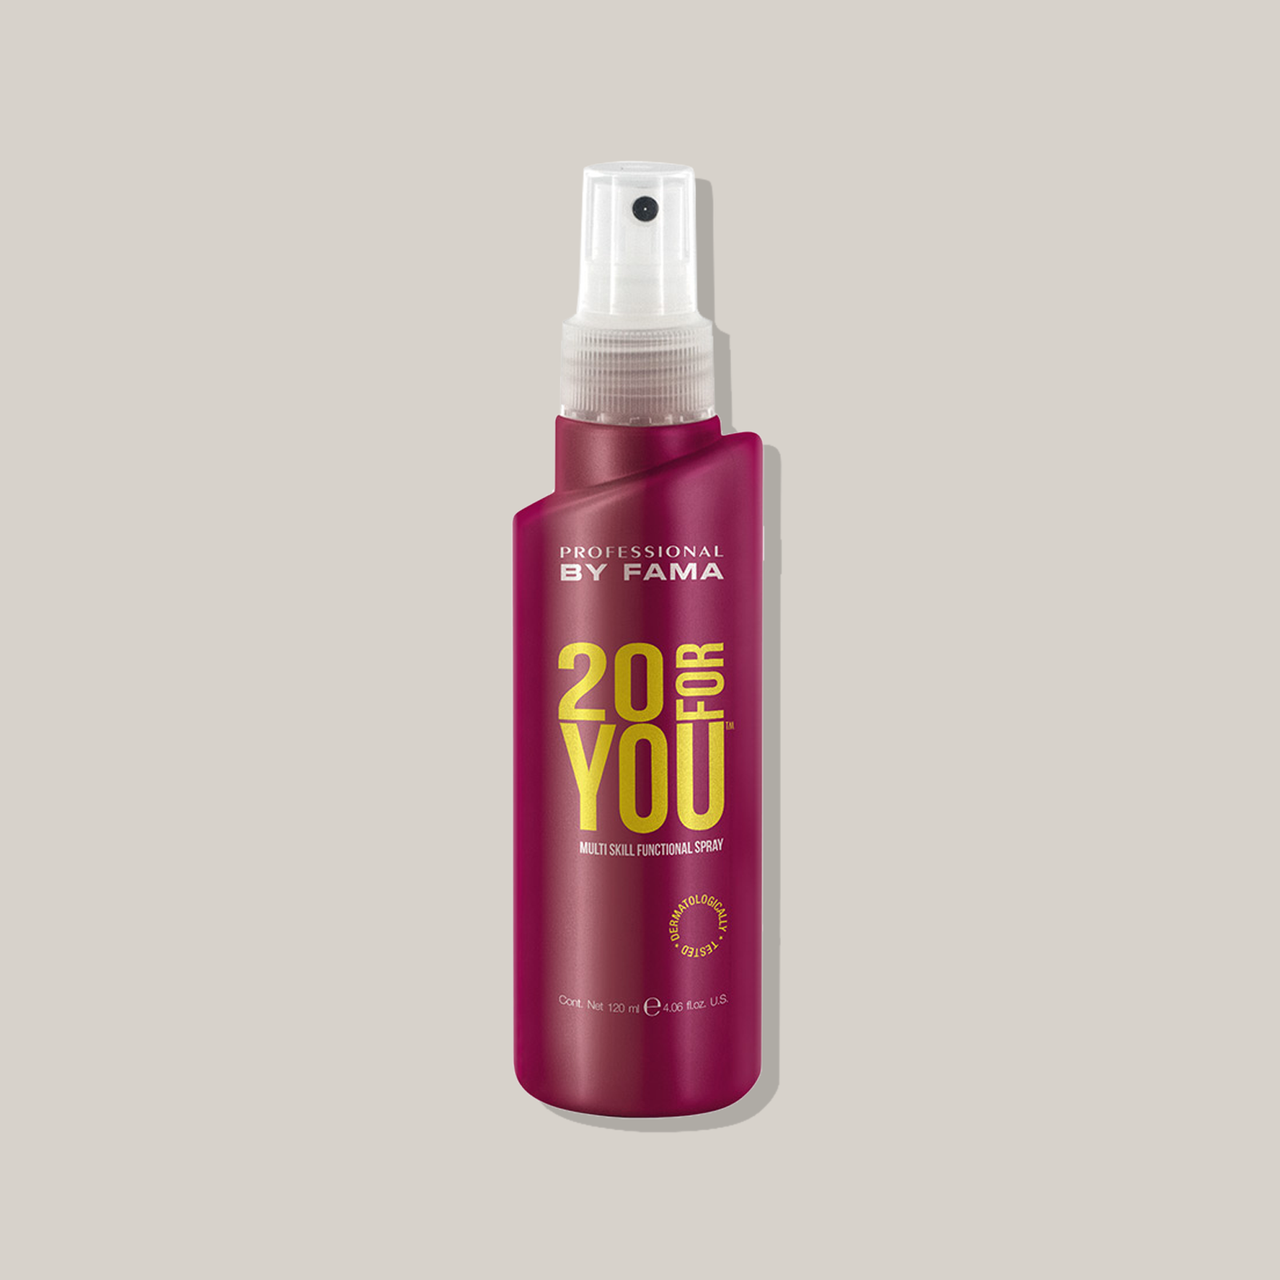 By Fama 20 FOR YOU Spray 120ml LeaveIn Treatment 